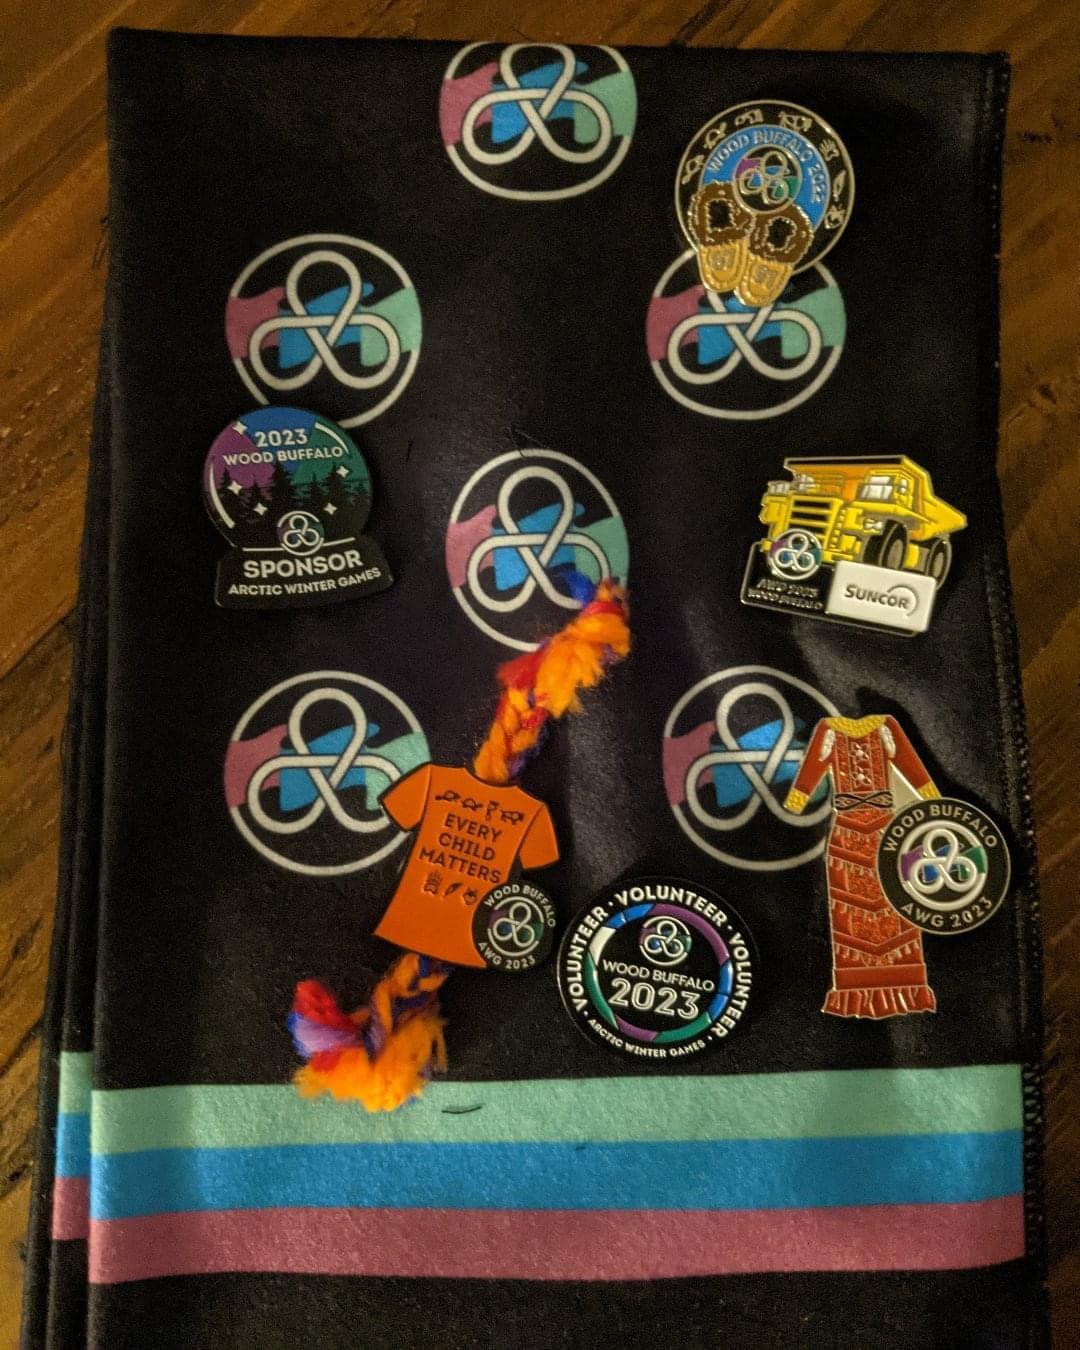 a collection of pins, including a Suncor pin